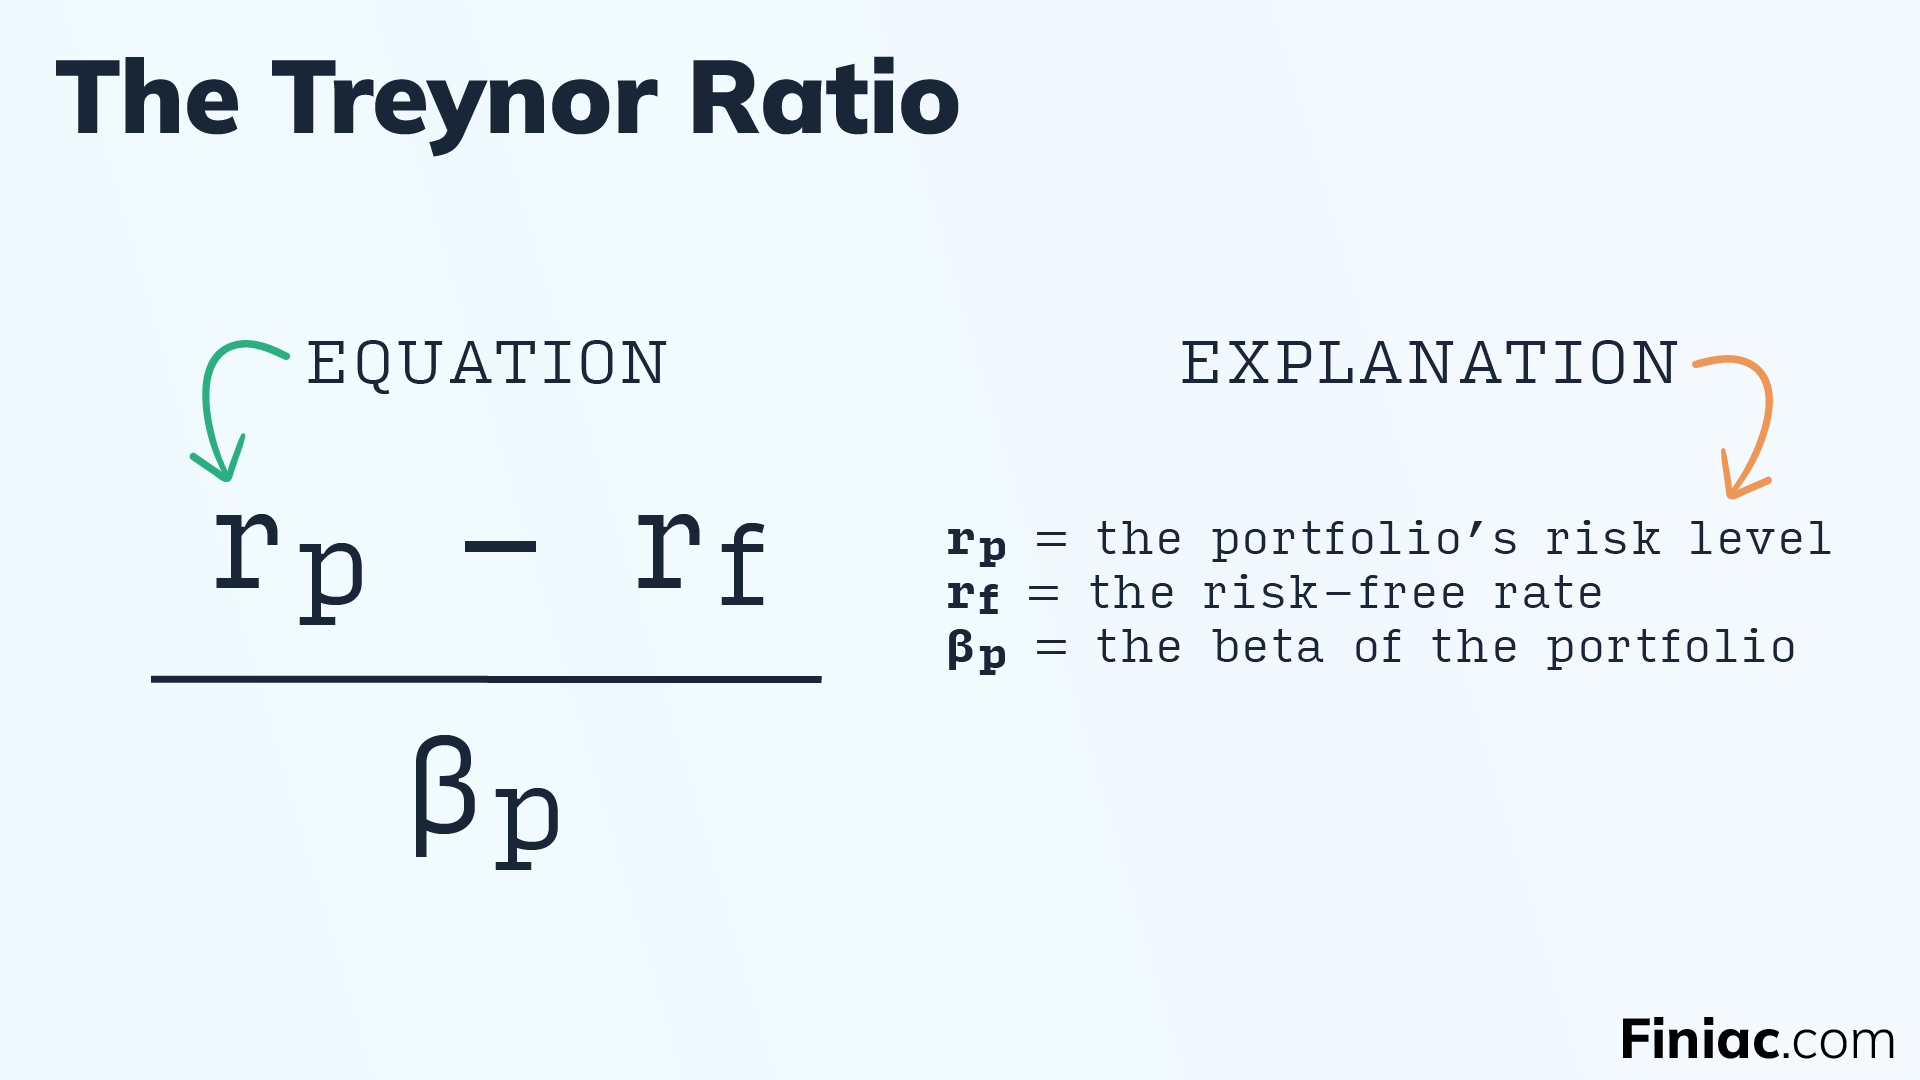 Graphic showing the Treynor Ratio equation, explained.